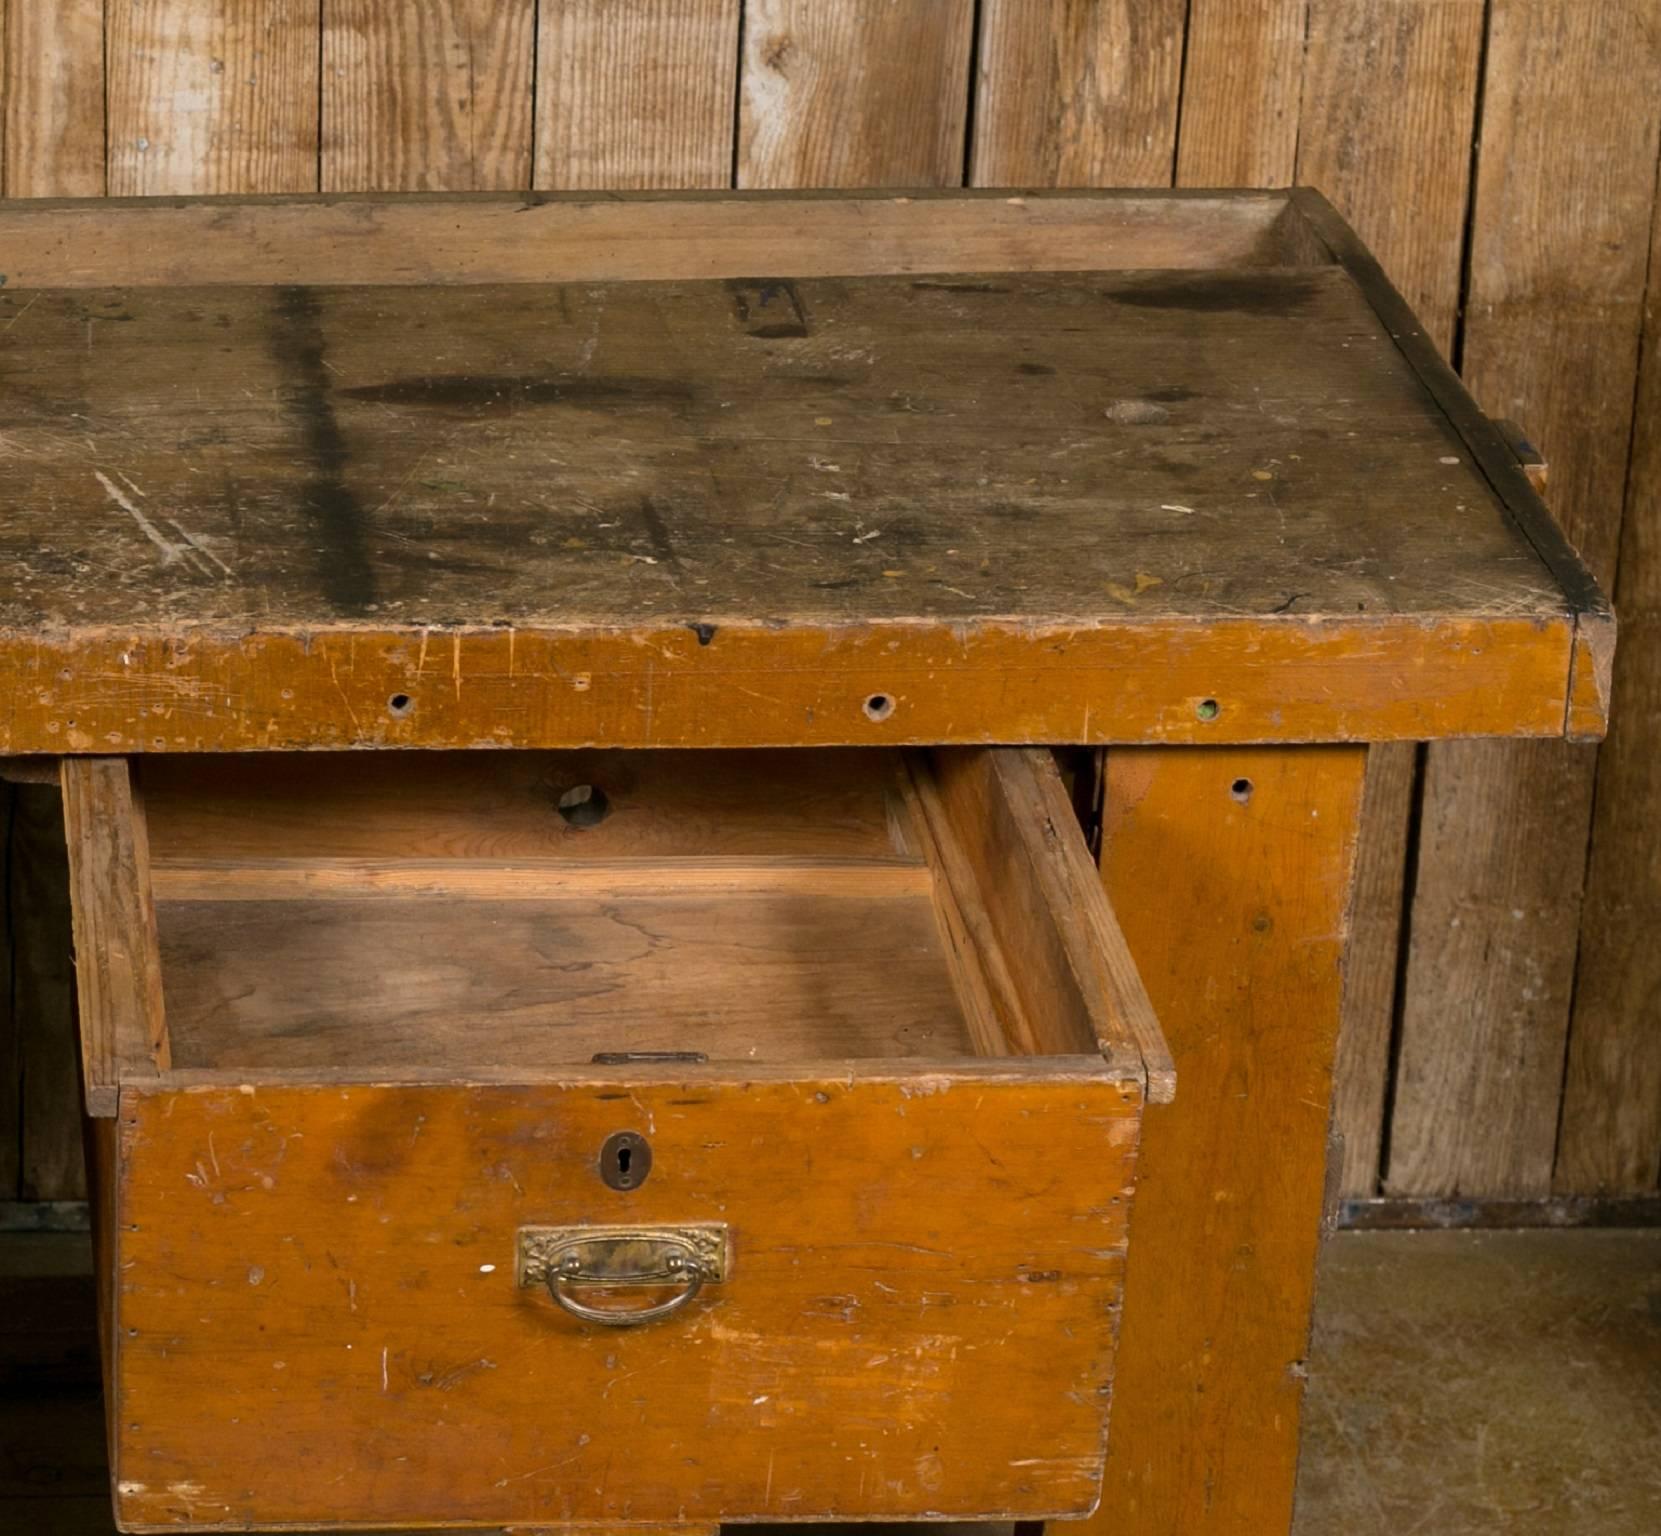 Rustic Antique Work Table with Two Drawers from Belgium, circa 1900